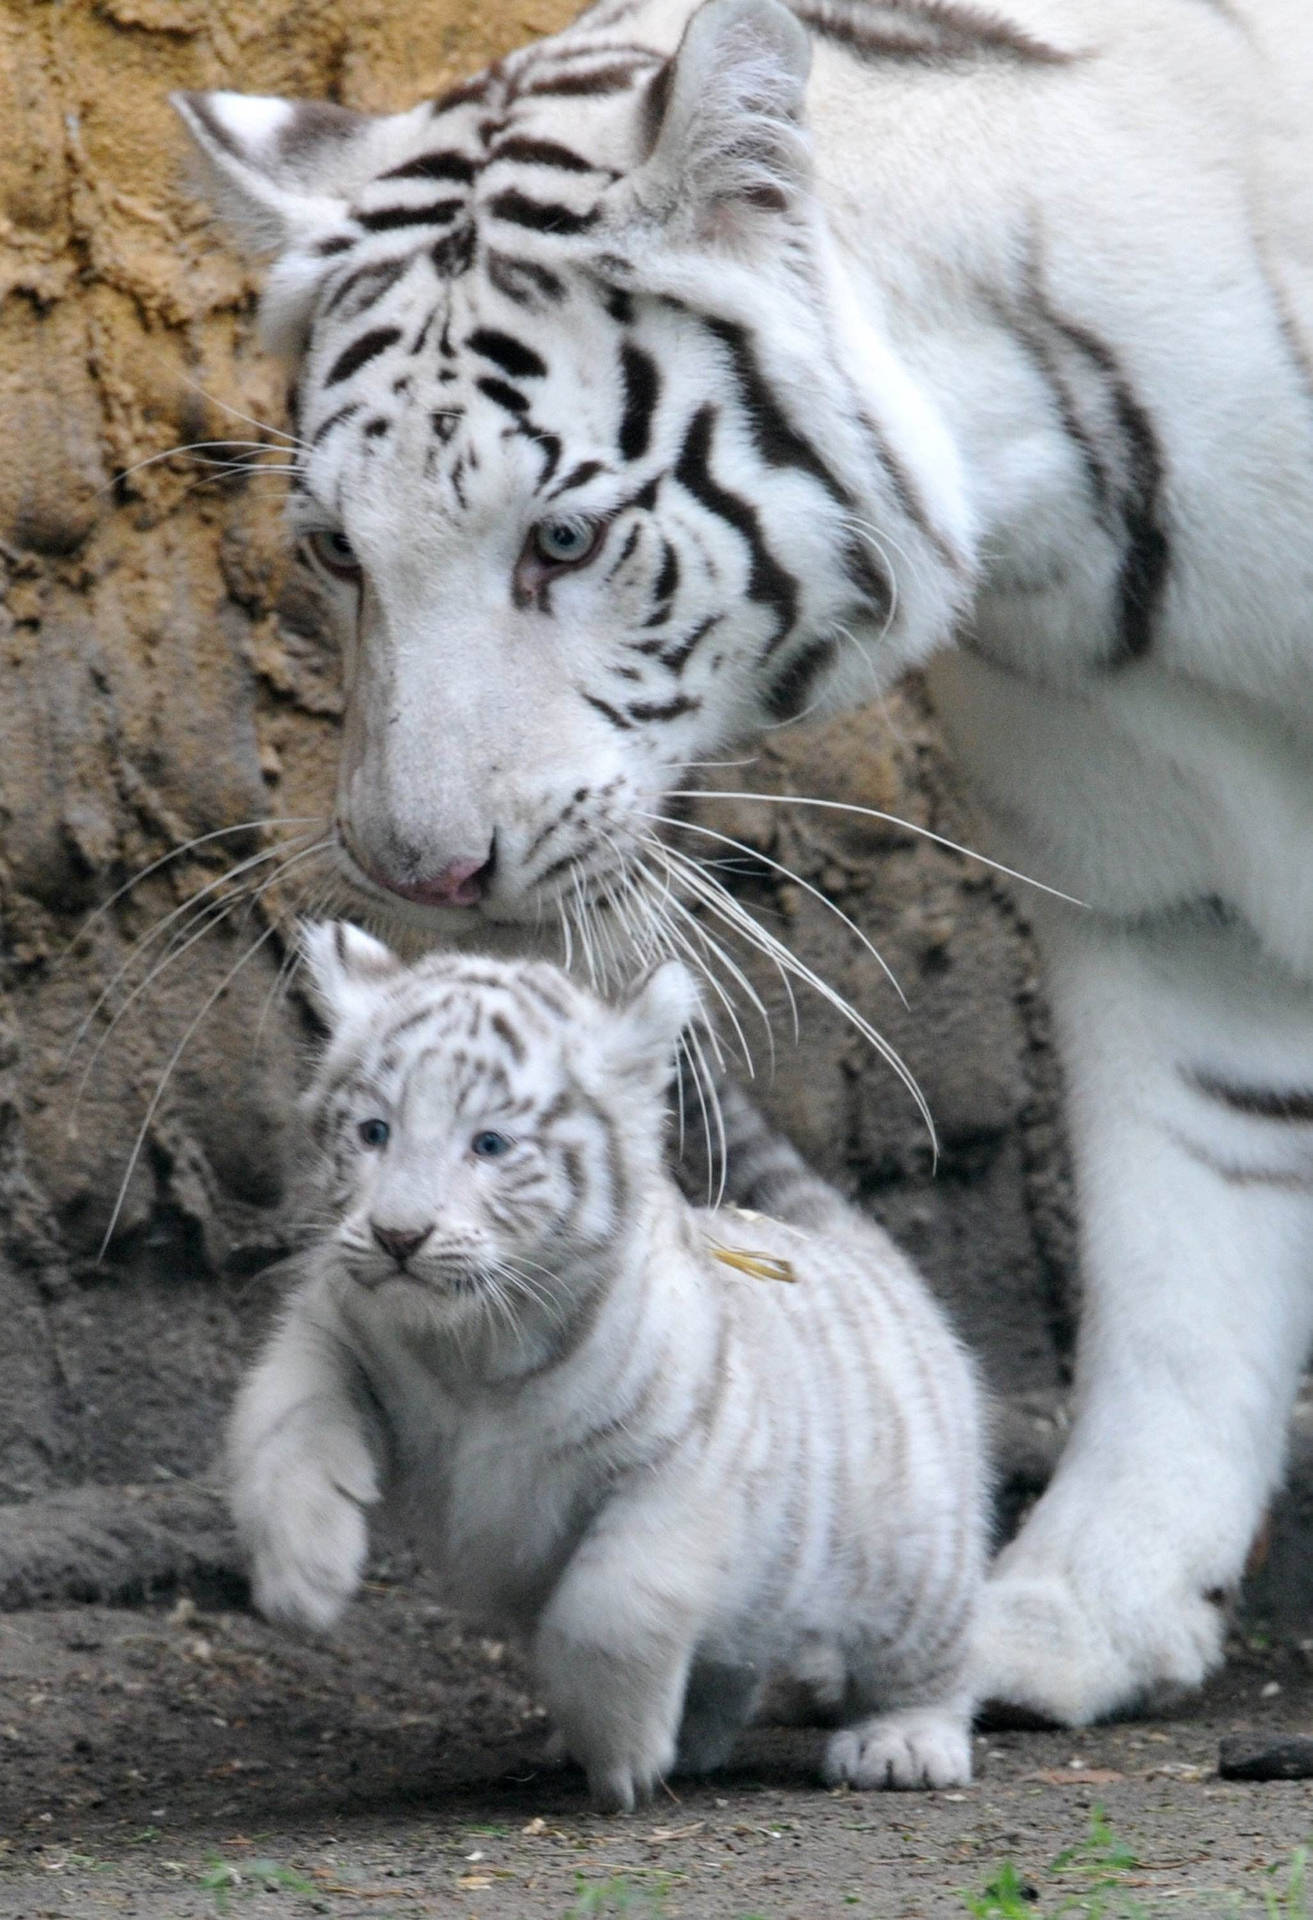 baby white tigers